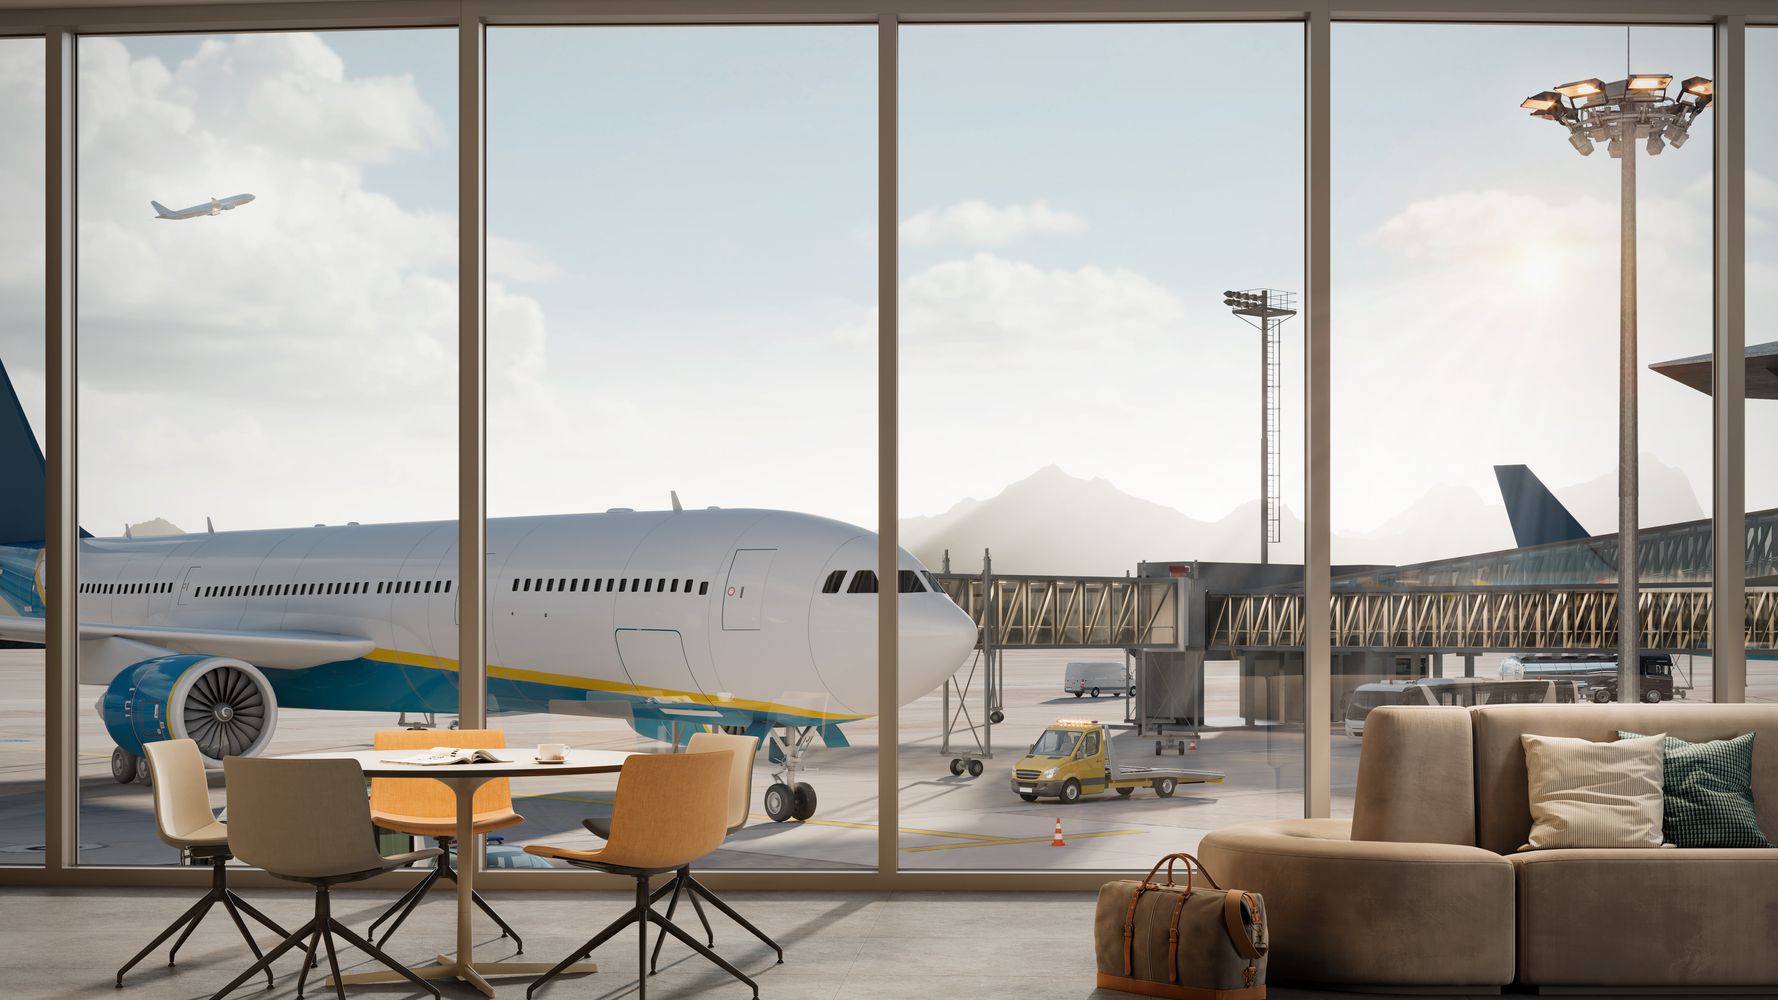 How To Get Into Airport Lounges Without Spending A Ton Of Money